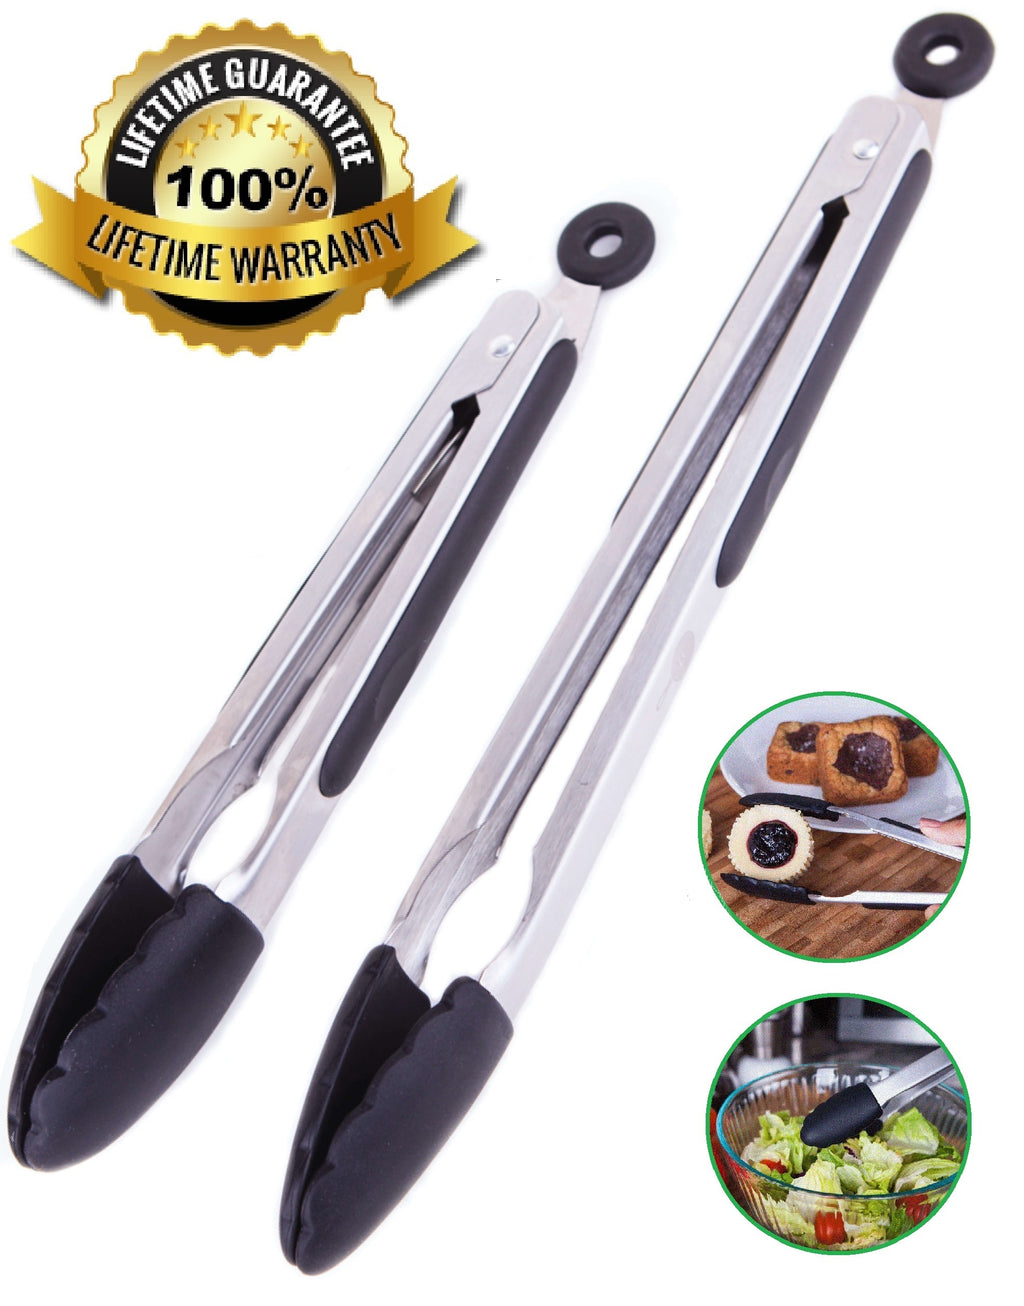 Premium Stainless Steel Kitchen Tongs by Integrity Chef - Set of 2 (12/9-inch) Food Grade Quality, Heat Resistant, Locking, Ergonomic Grip, Non-Stick Silicone Tips, SAVE A LIFE!